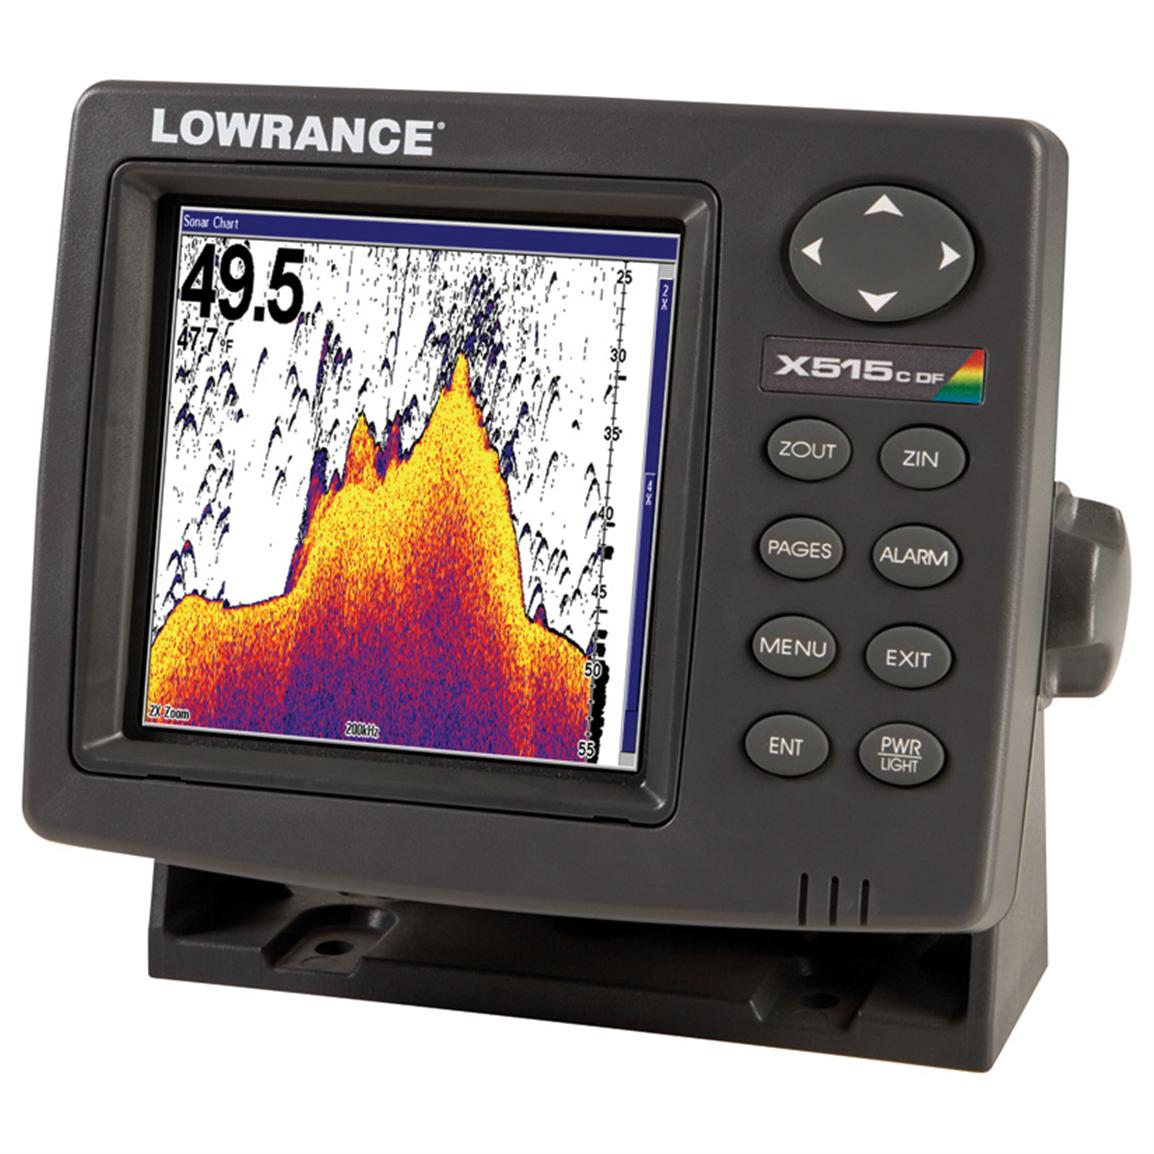 lowrance-x515c-df-fishfinder-123269-fish-finders-at-sportsman-s-guide